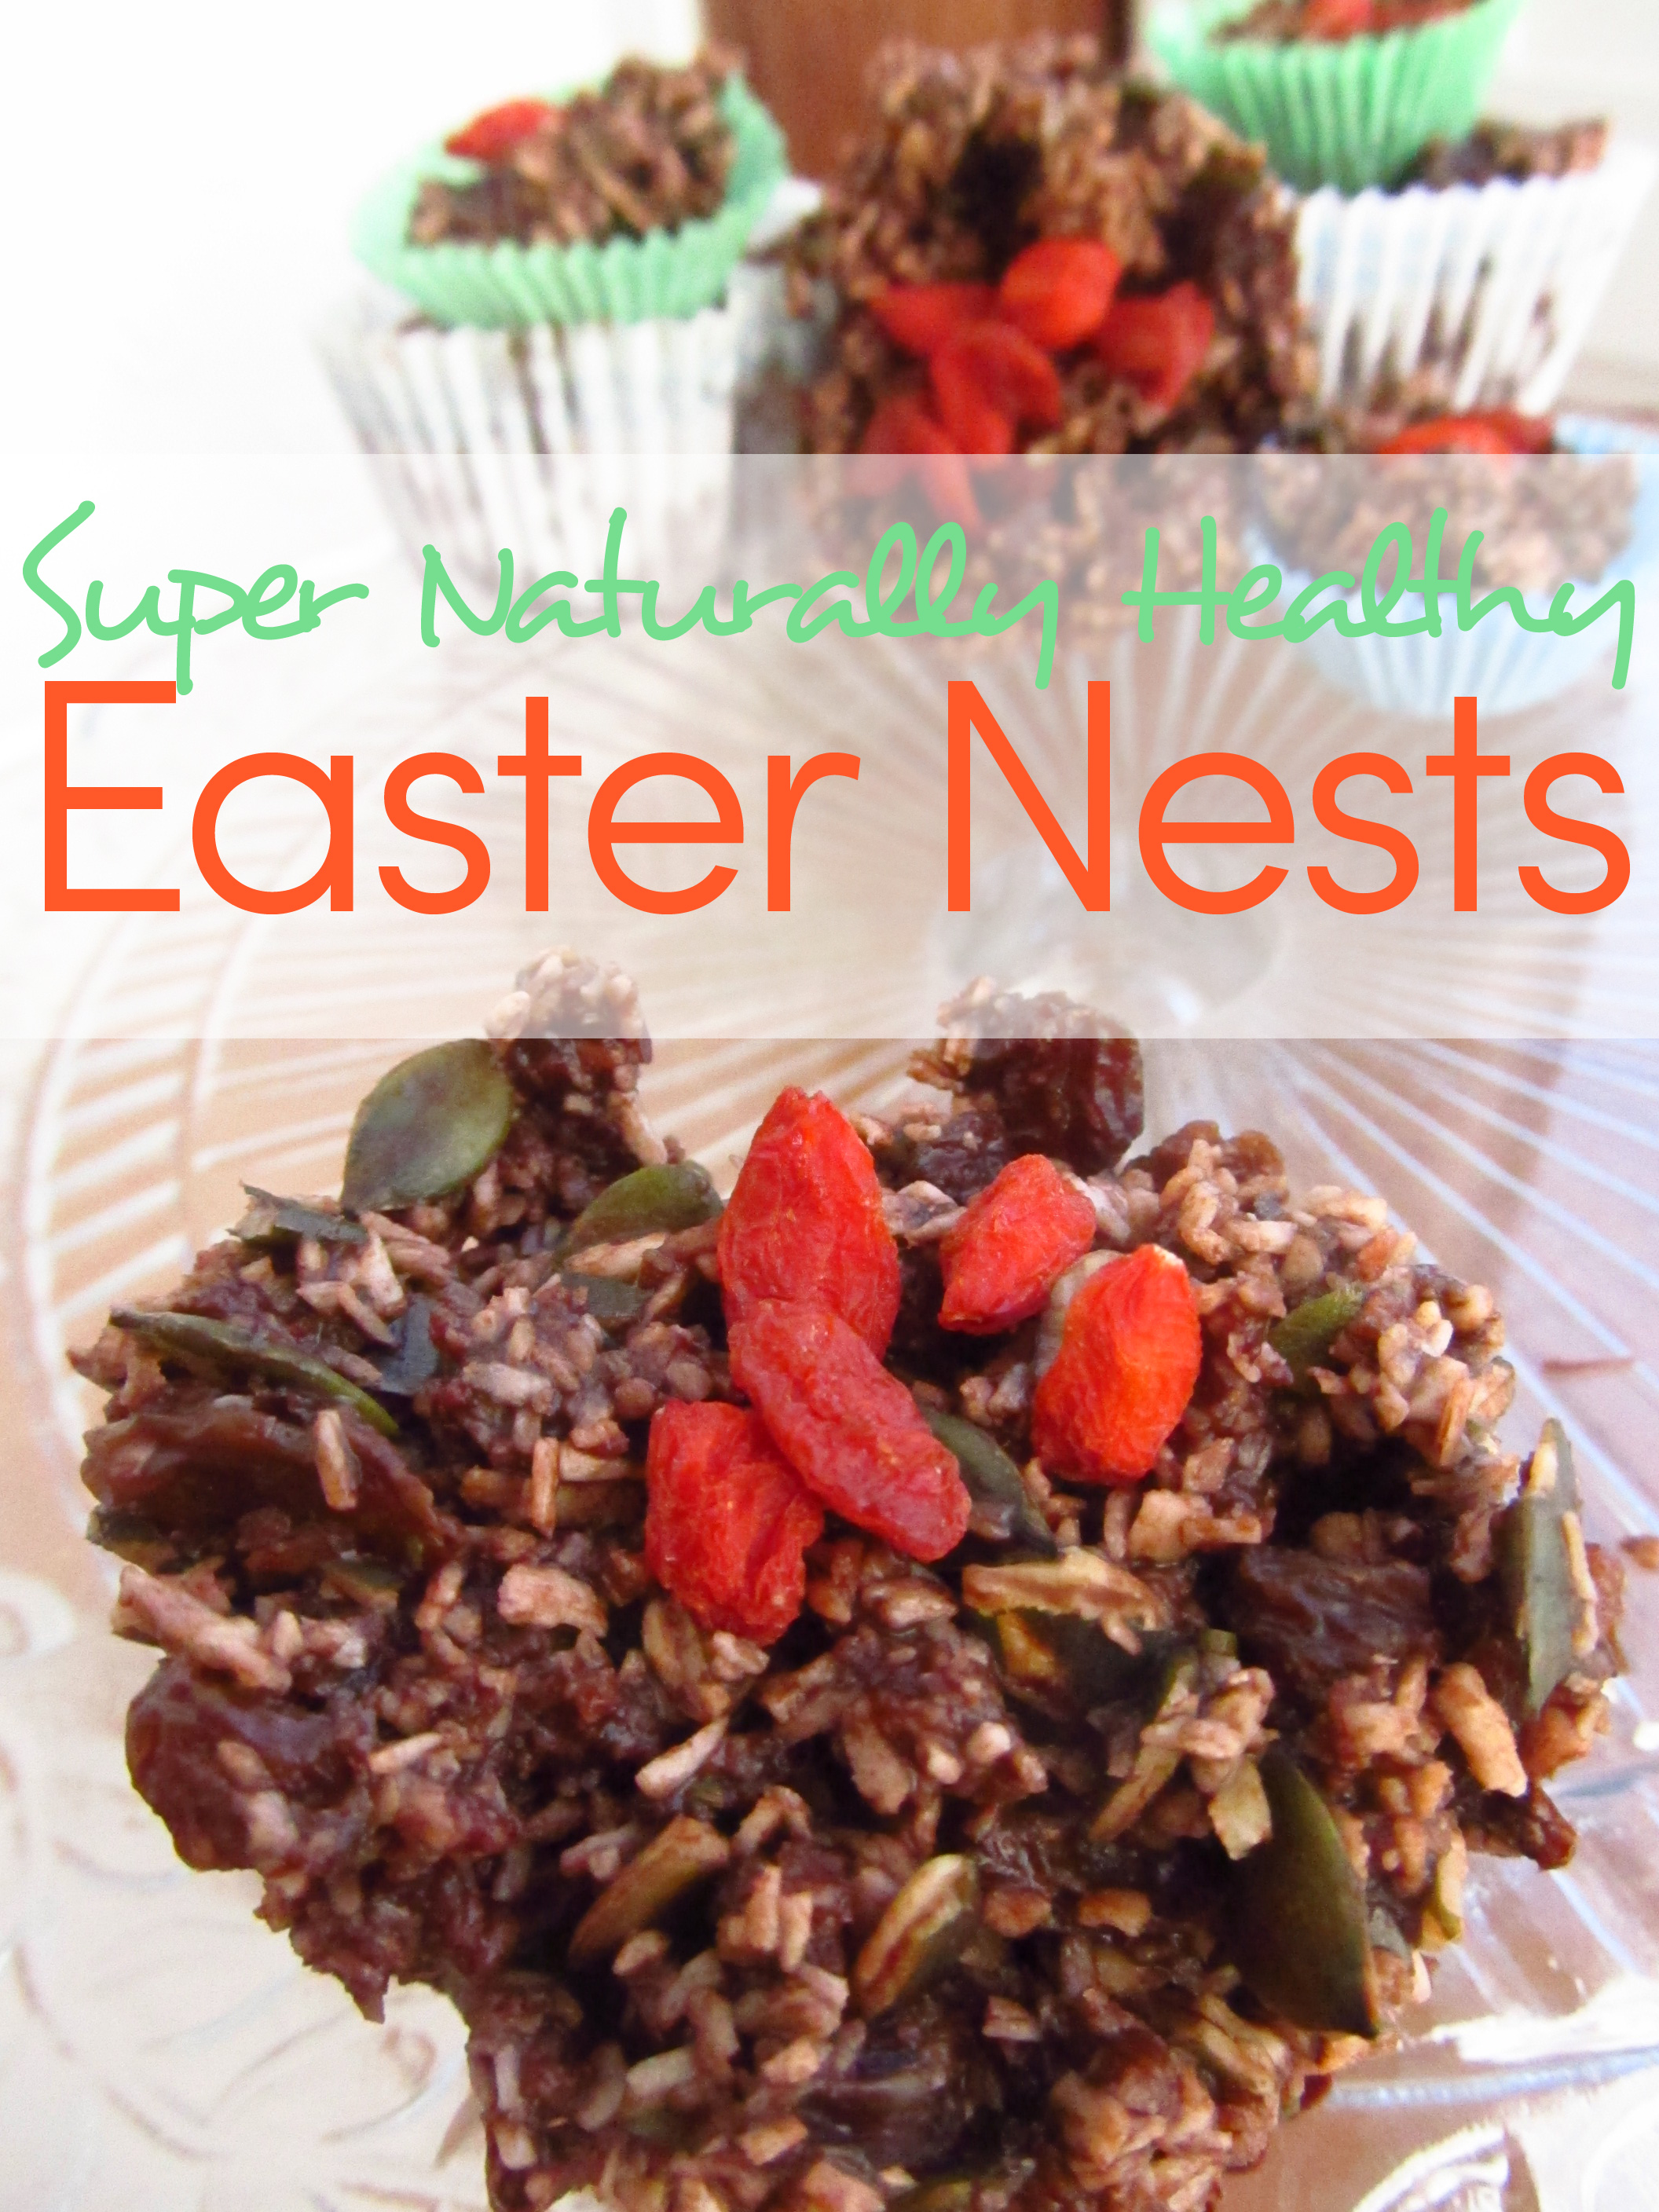 Chocolate Easter Nests + other (Healthy) Chocolate Tastic Ideas